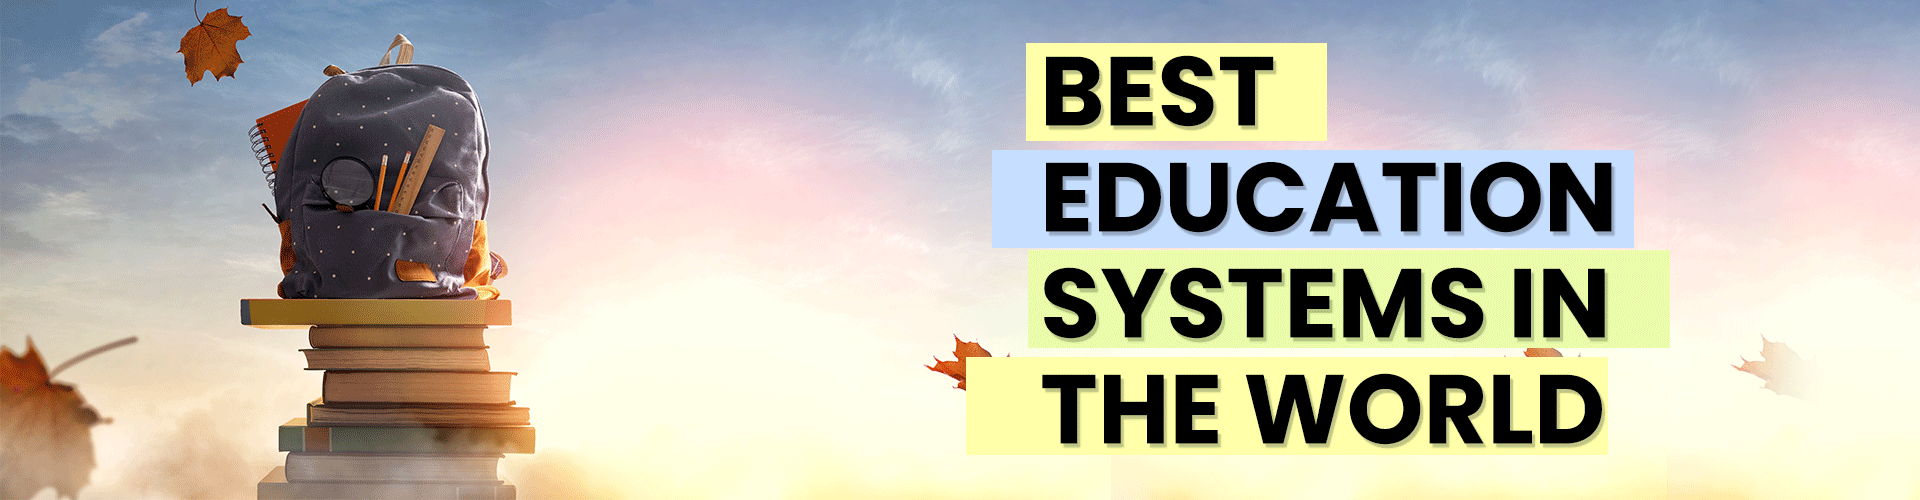 Best Education Systems In The World